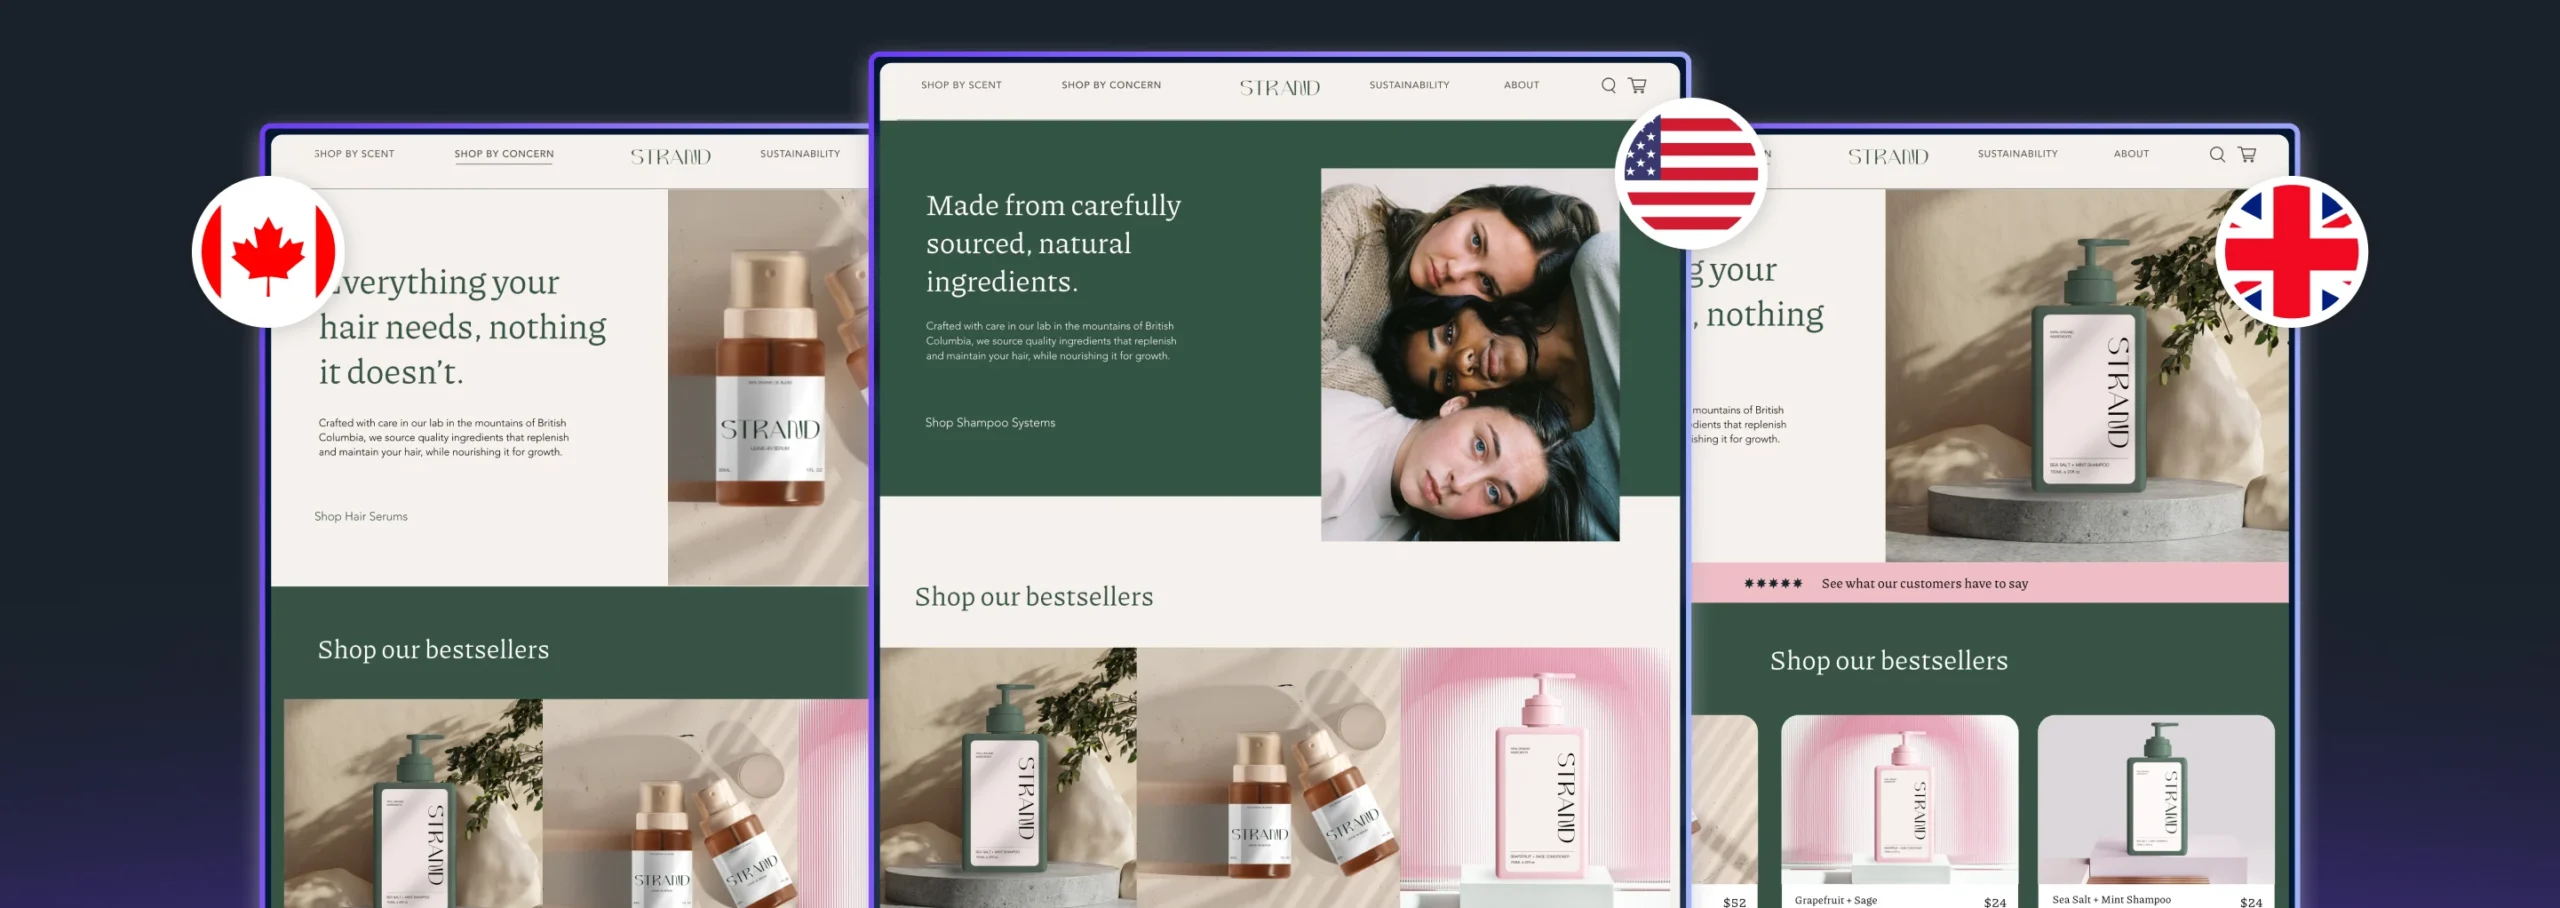 Example of an ecommerce brand with multiple stores for different countries